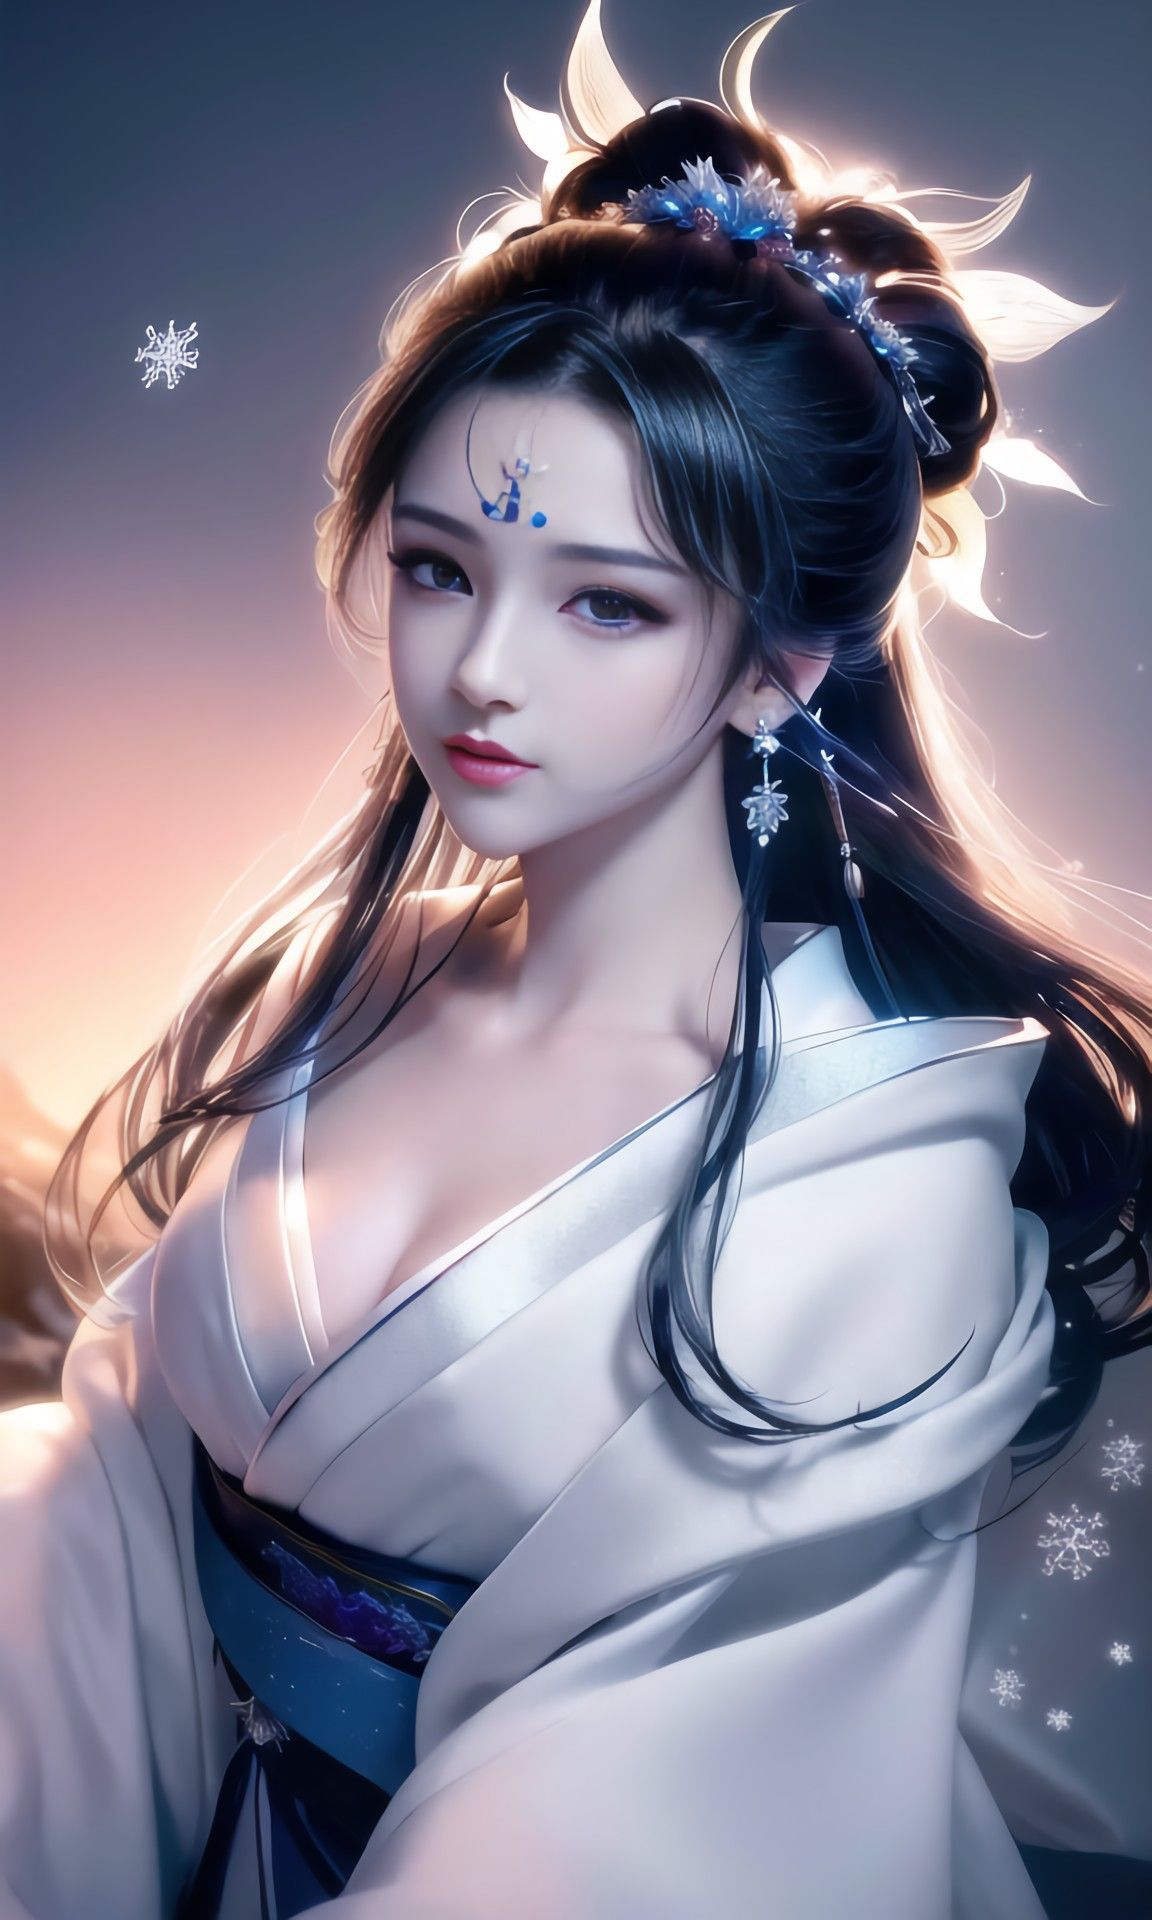 General 1152x1920 AI art women Asian portrait display long hair looking at viewer earring snowflakes simple background